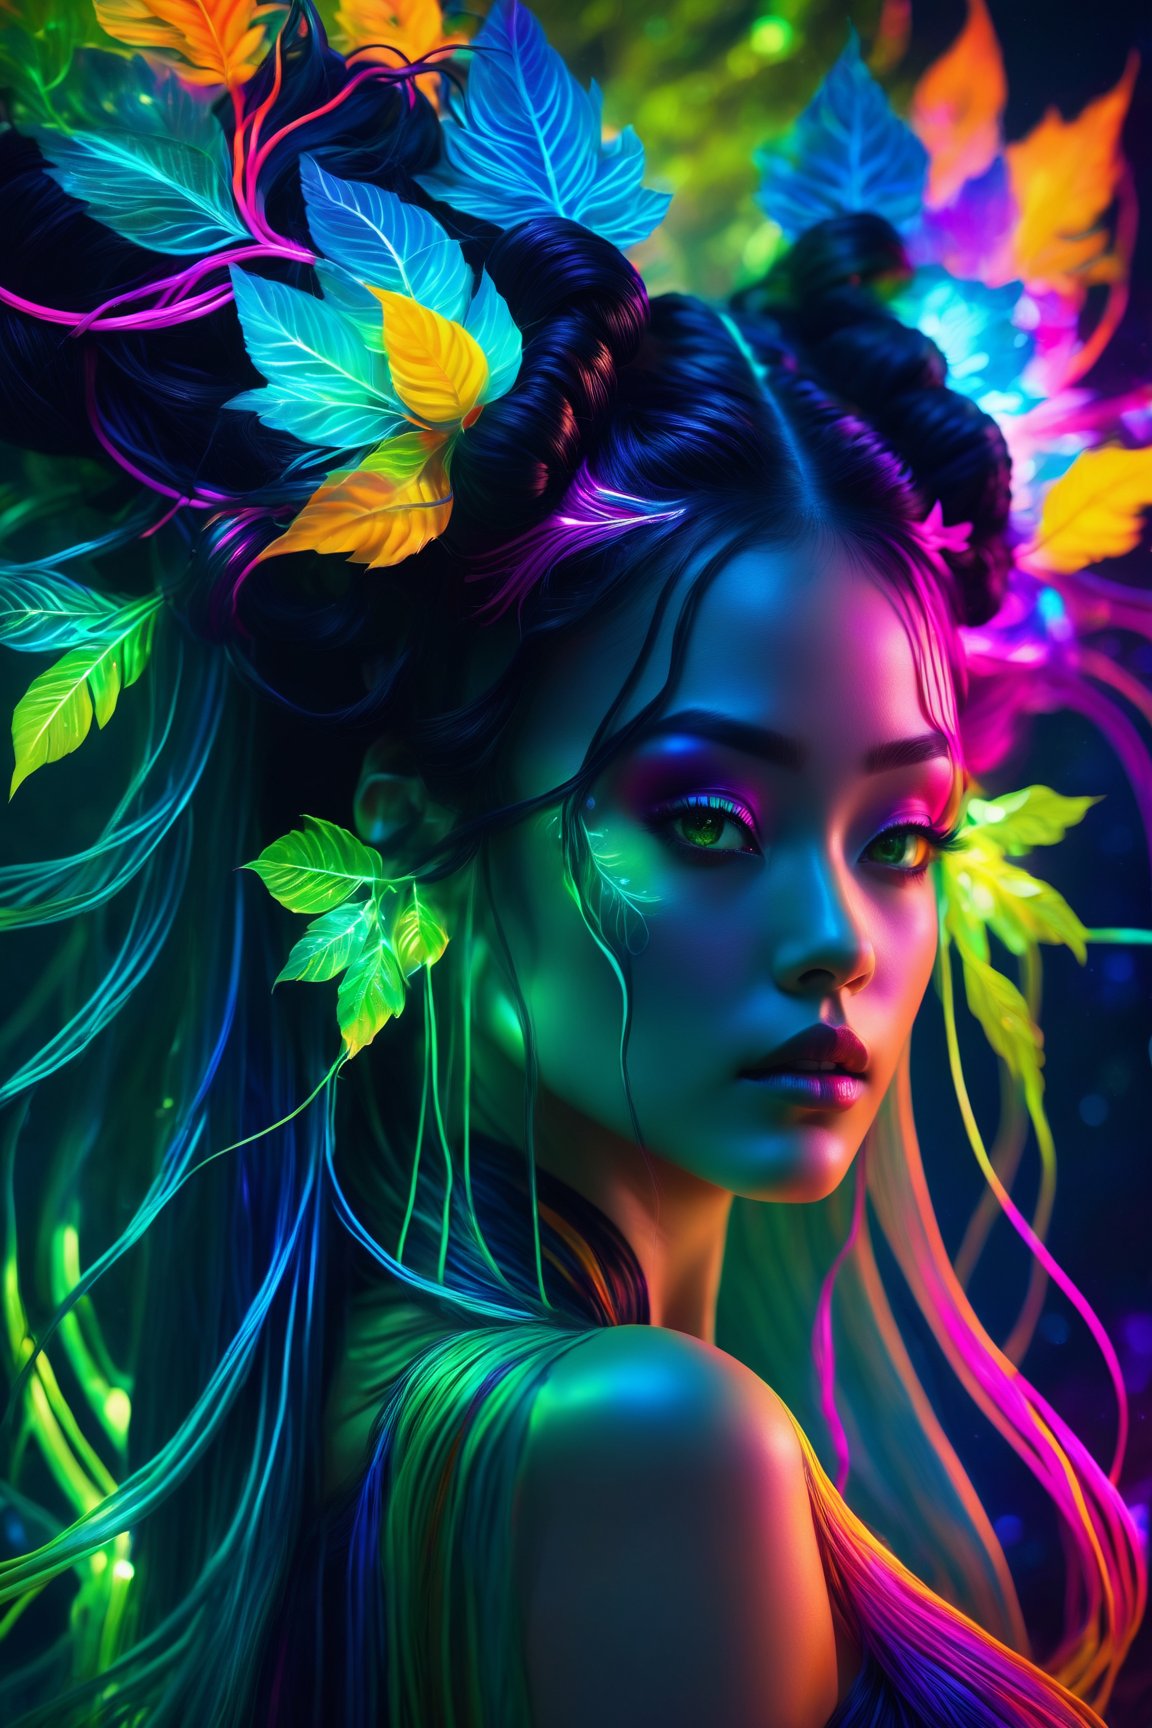 (best quality,8K,highres,masterpiece), ultra-detailed, (super colorful, fantasy creature style) portrayal of an enchanting being, resembling the goddess of horticulture. This otherworldly entity possesses long, flowing black hair styled in space buns and radiates an aura of mystic charm. Instead of ordinary hair, her locks are transformed into brilliant neon tendrils that flow like cascading waterfalls, each strand shimmering with a dazzling array of vivid colors. She stands as a beautiful backlit silhouette, her body adorned with millions of microscopic fibers, ultra-bright neon strings, and intricate neon vines and leaves that intertwine with futuristic flora. The entire scene is bathed in a vibrant green color palette, creating a mesmerizing and fantastical world where nature and technology harmoniously coexist in a breathtaking display of color and magic.